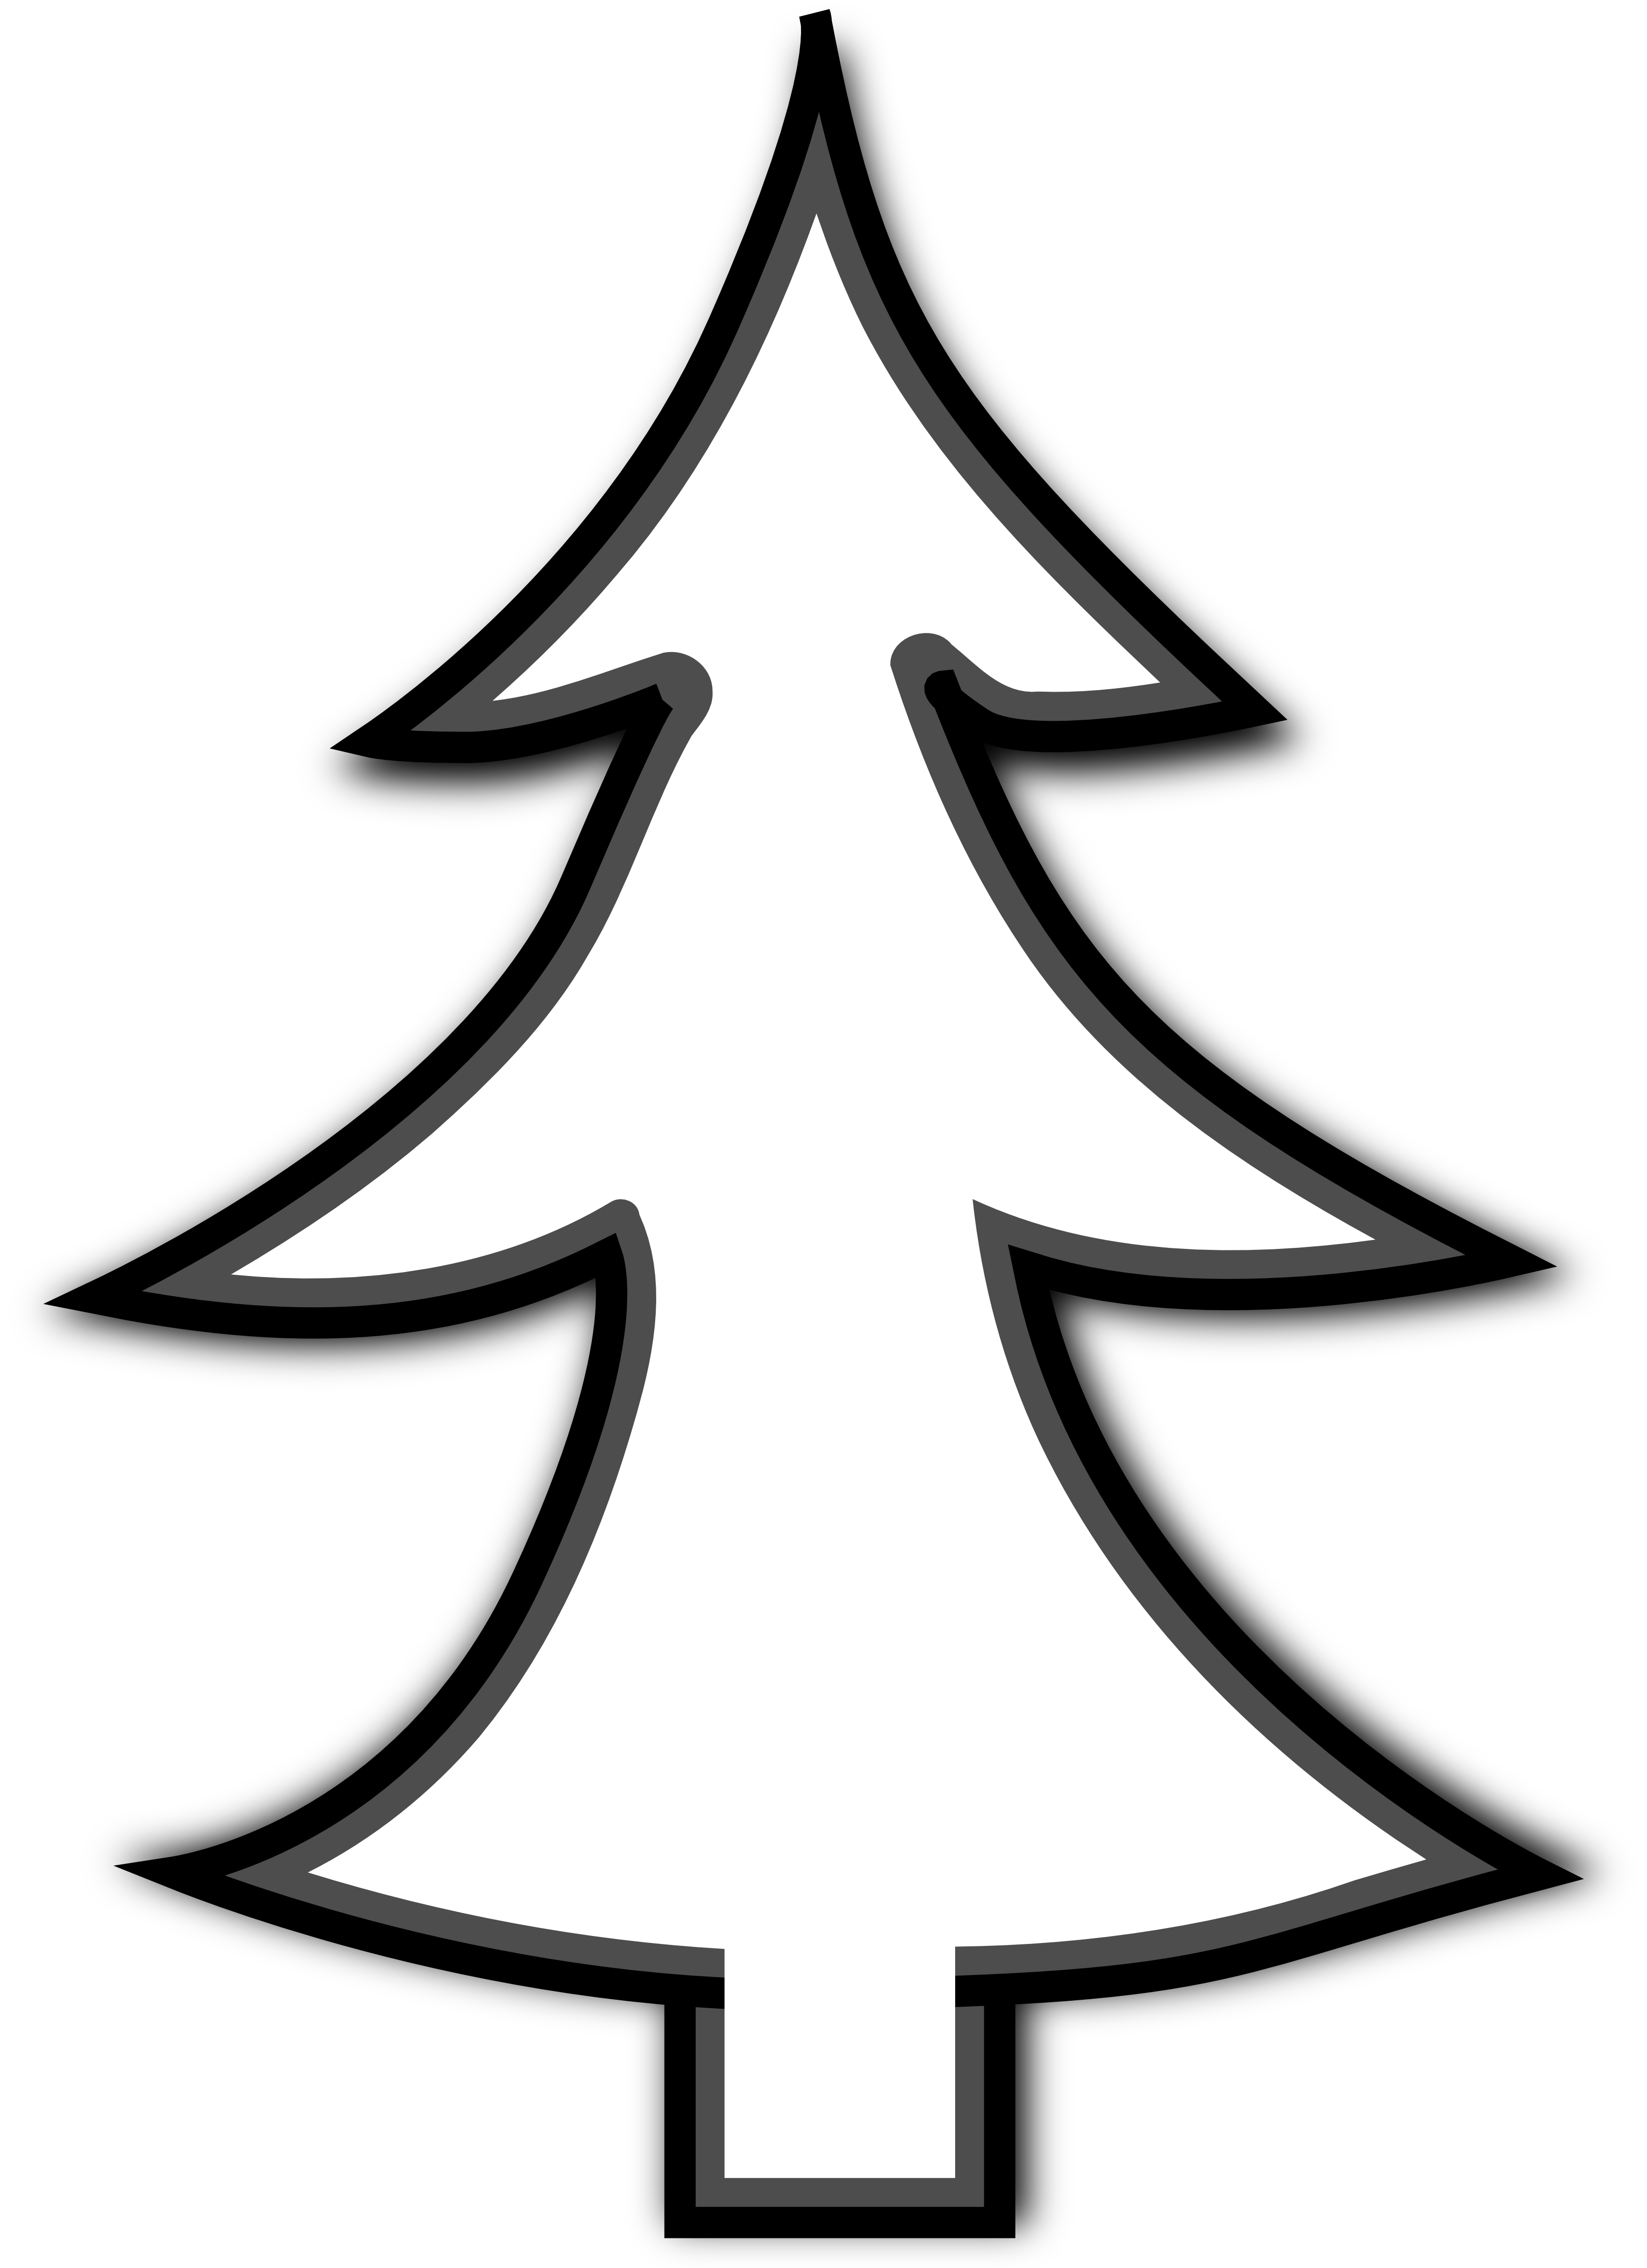 Black And White Christmas Tree Clip Art - ClipArt Best